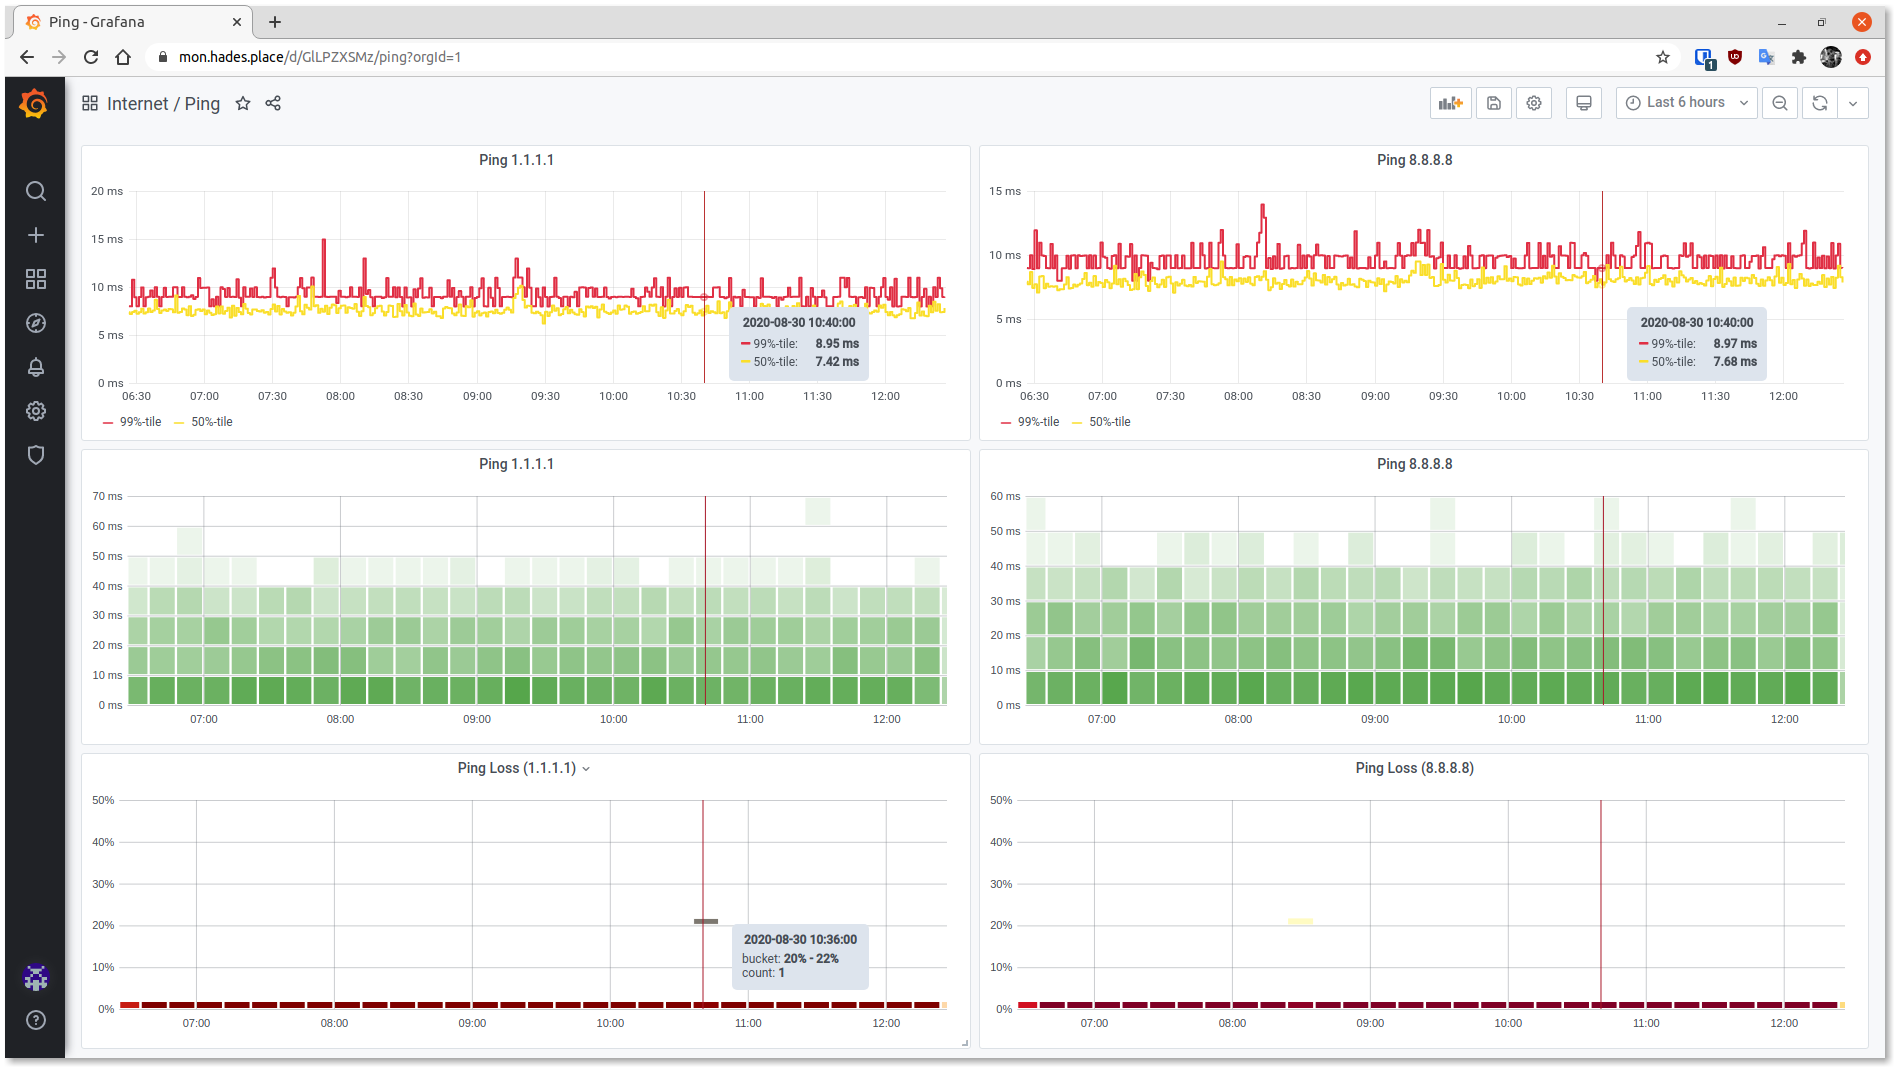 The ping ping dashboard showing a little a few lost packets to Cloudflare.